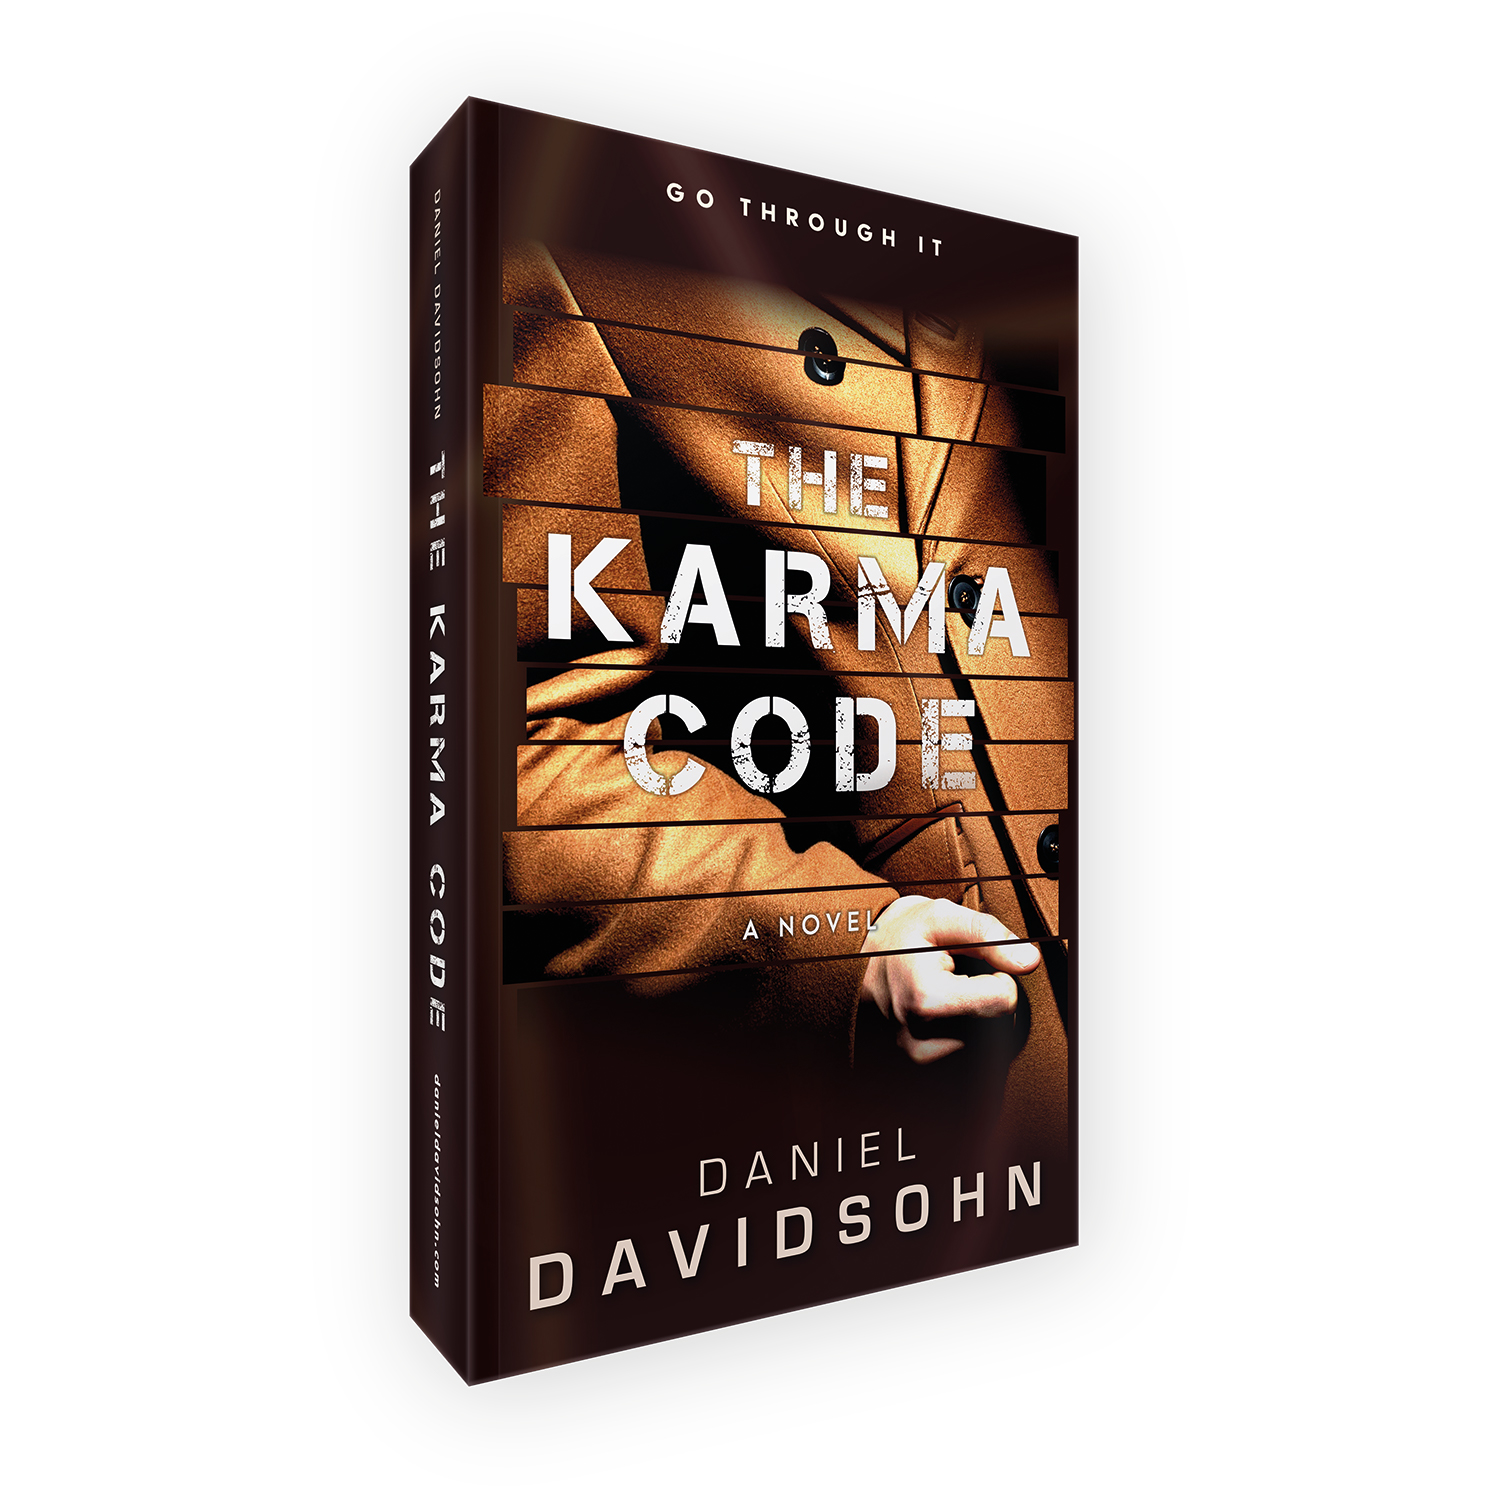 'The Karma Code' is techno thriller, by author Daniel Davidsohn. The book cover & interior were designed by Mark Thomas, of coverness.com. To find out more about my book design services, please visit www.coverness.com.